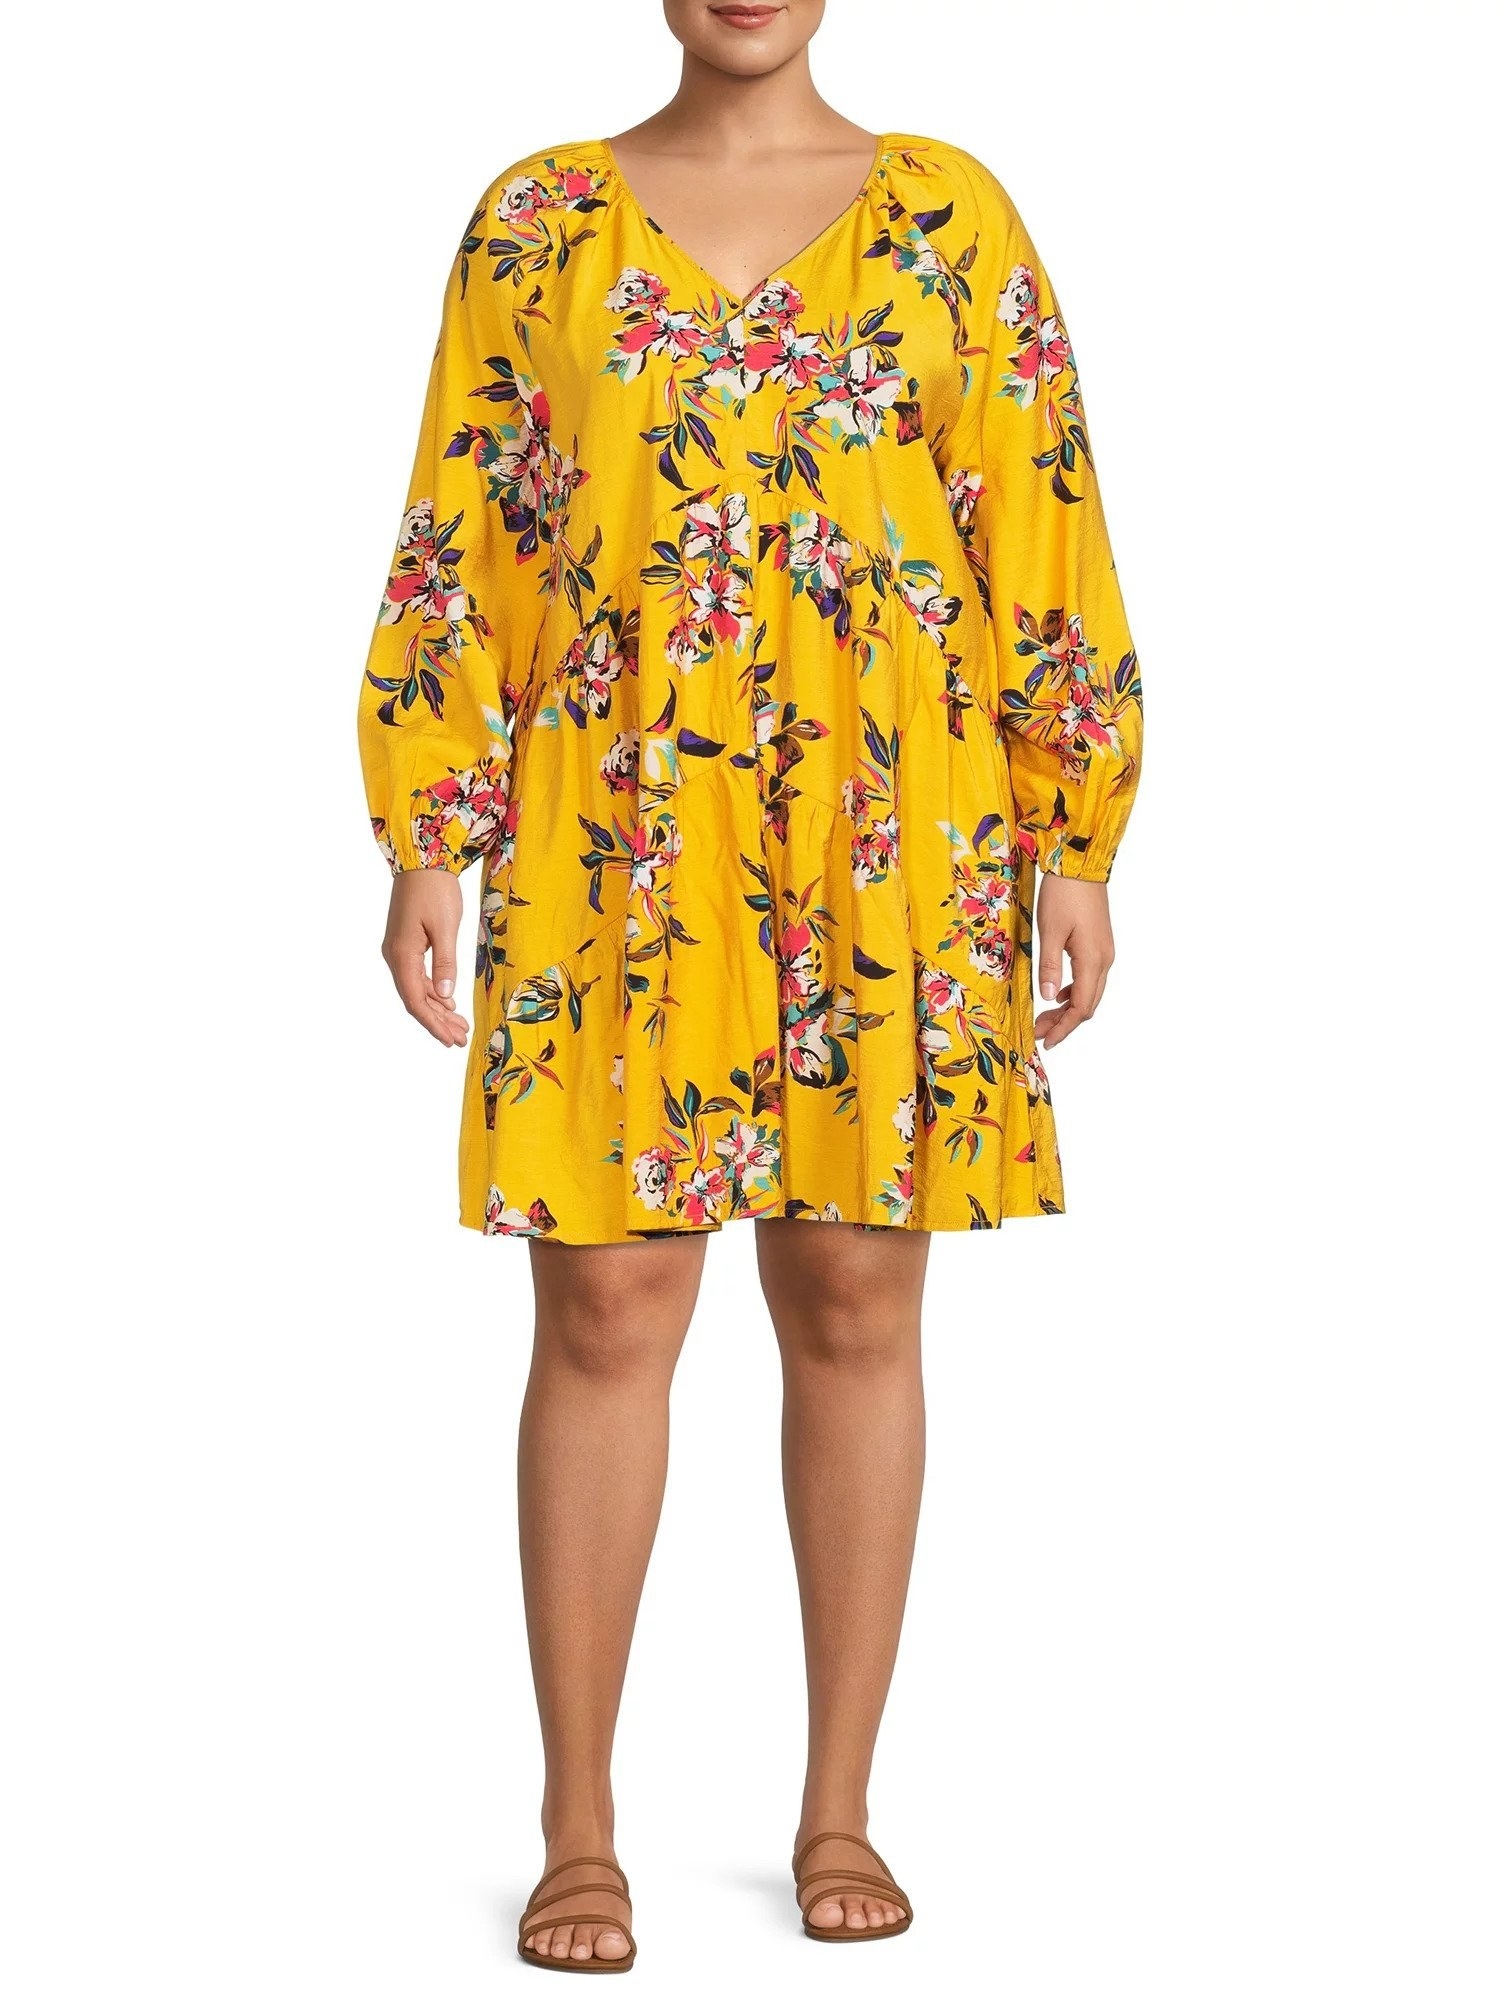 Model wearing the floral dress in yellow